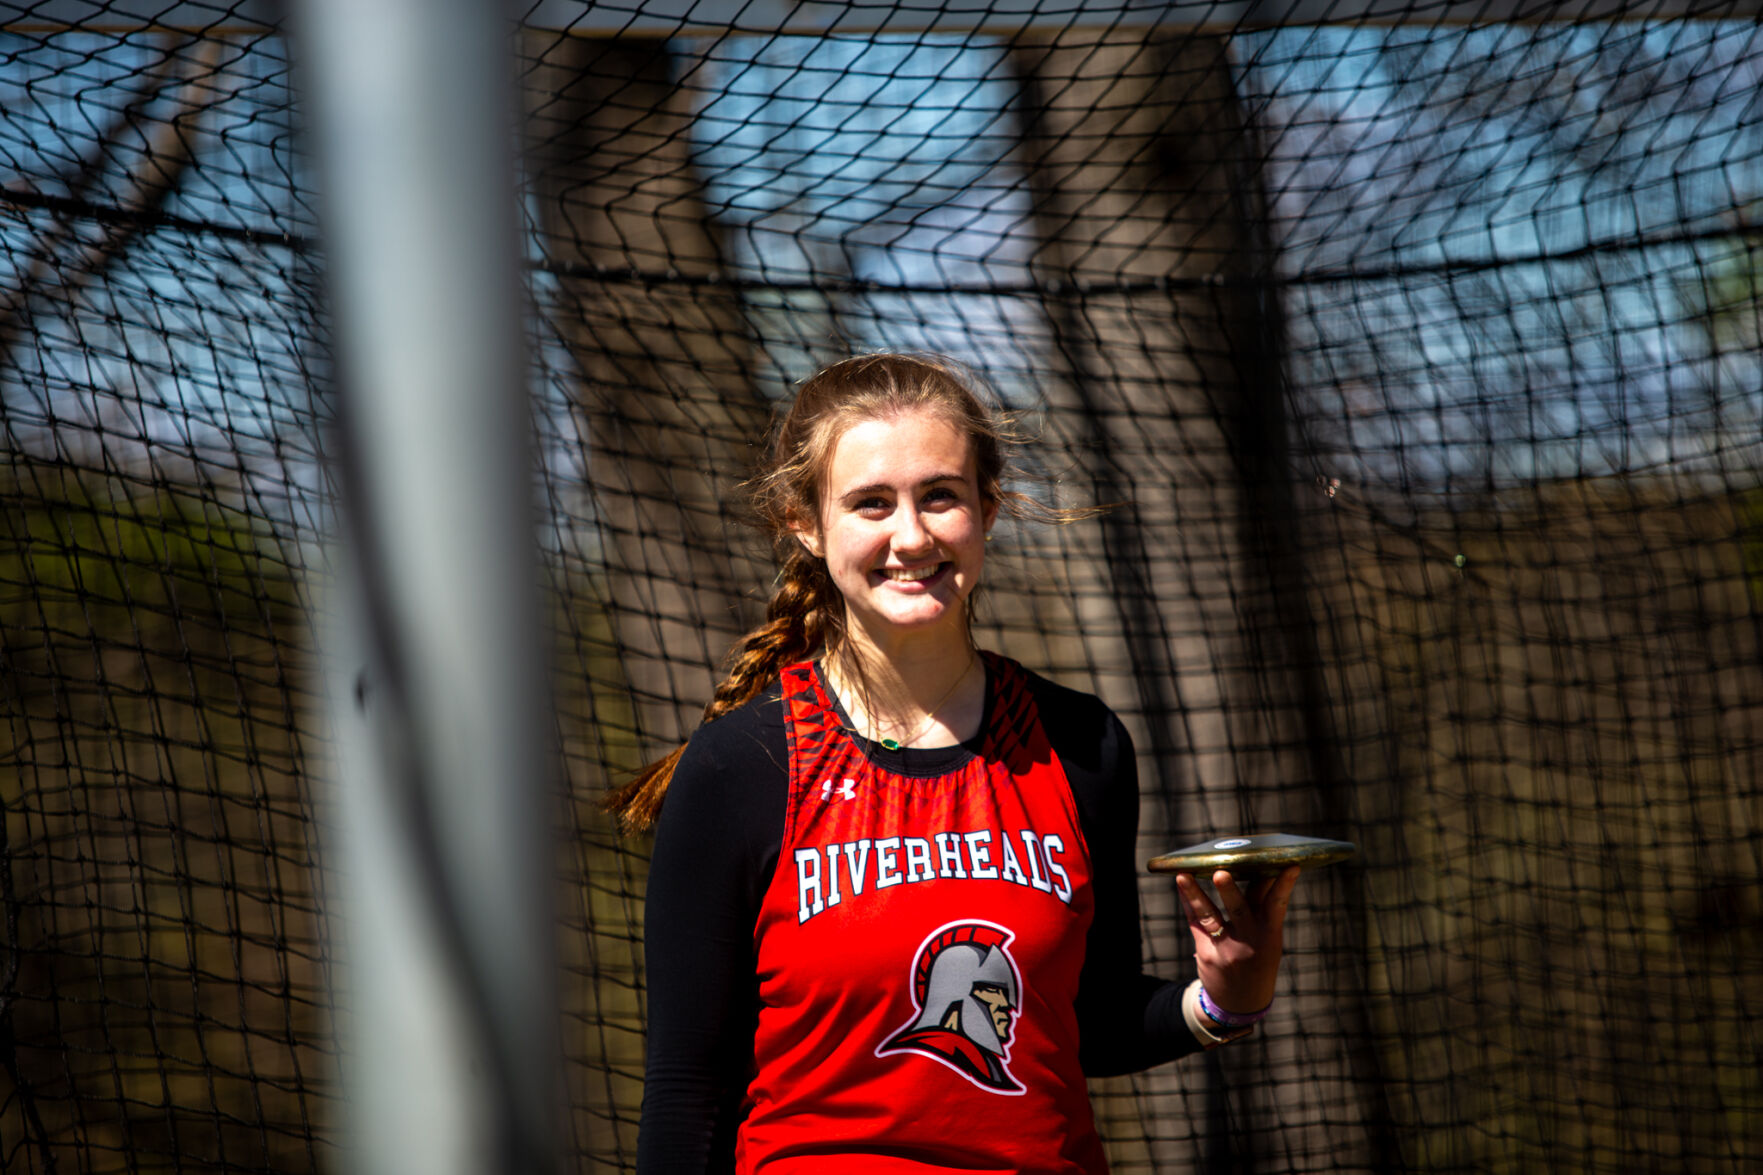 Riverheads Junior Excels in Soccer and Track: Meet Mackenzie Roller, Two-Sport Phenom